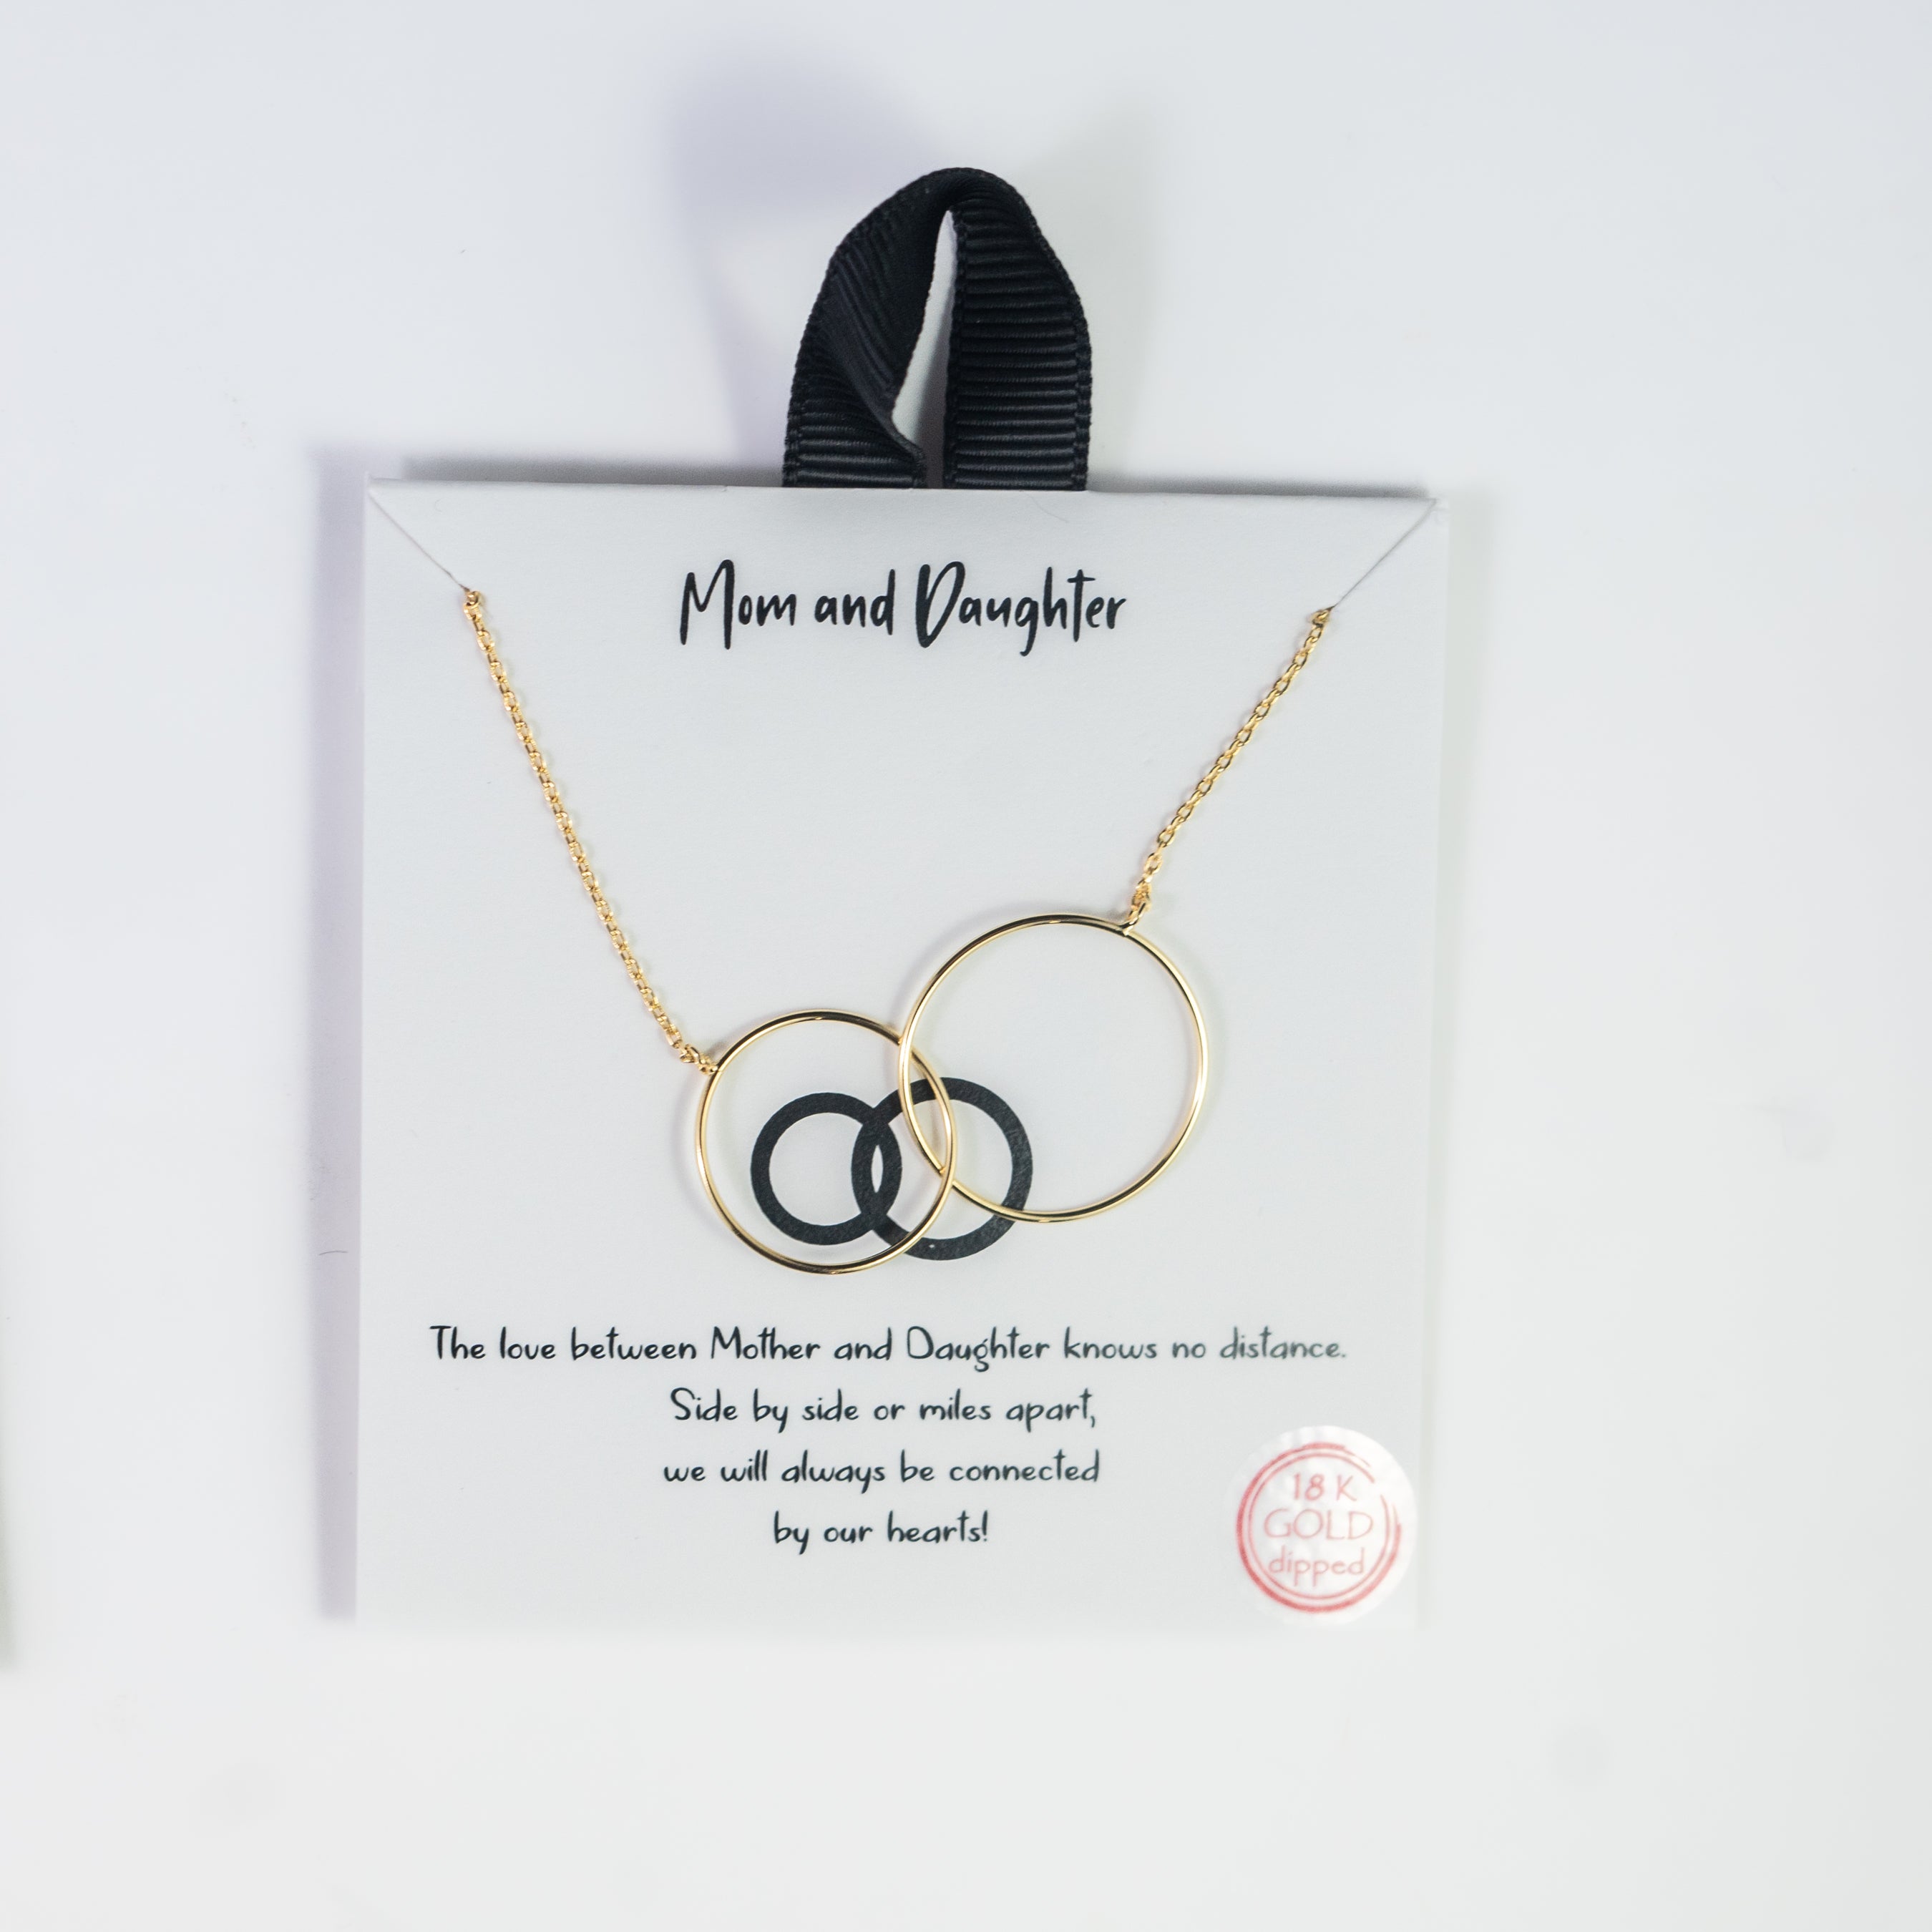 Mom & Daughter Necklace